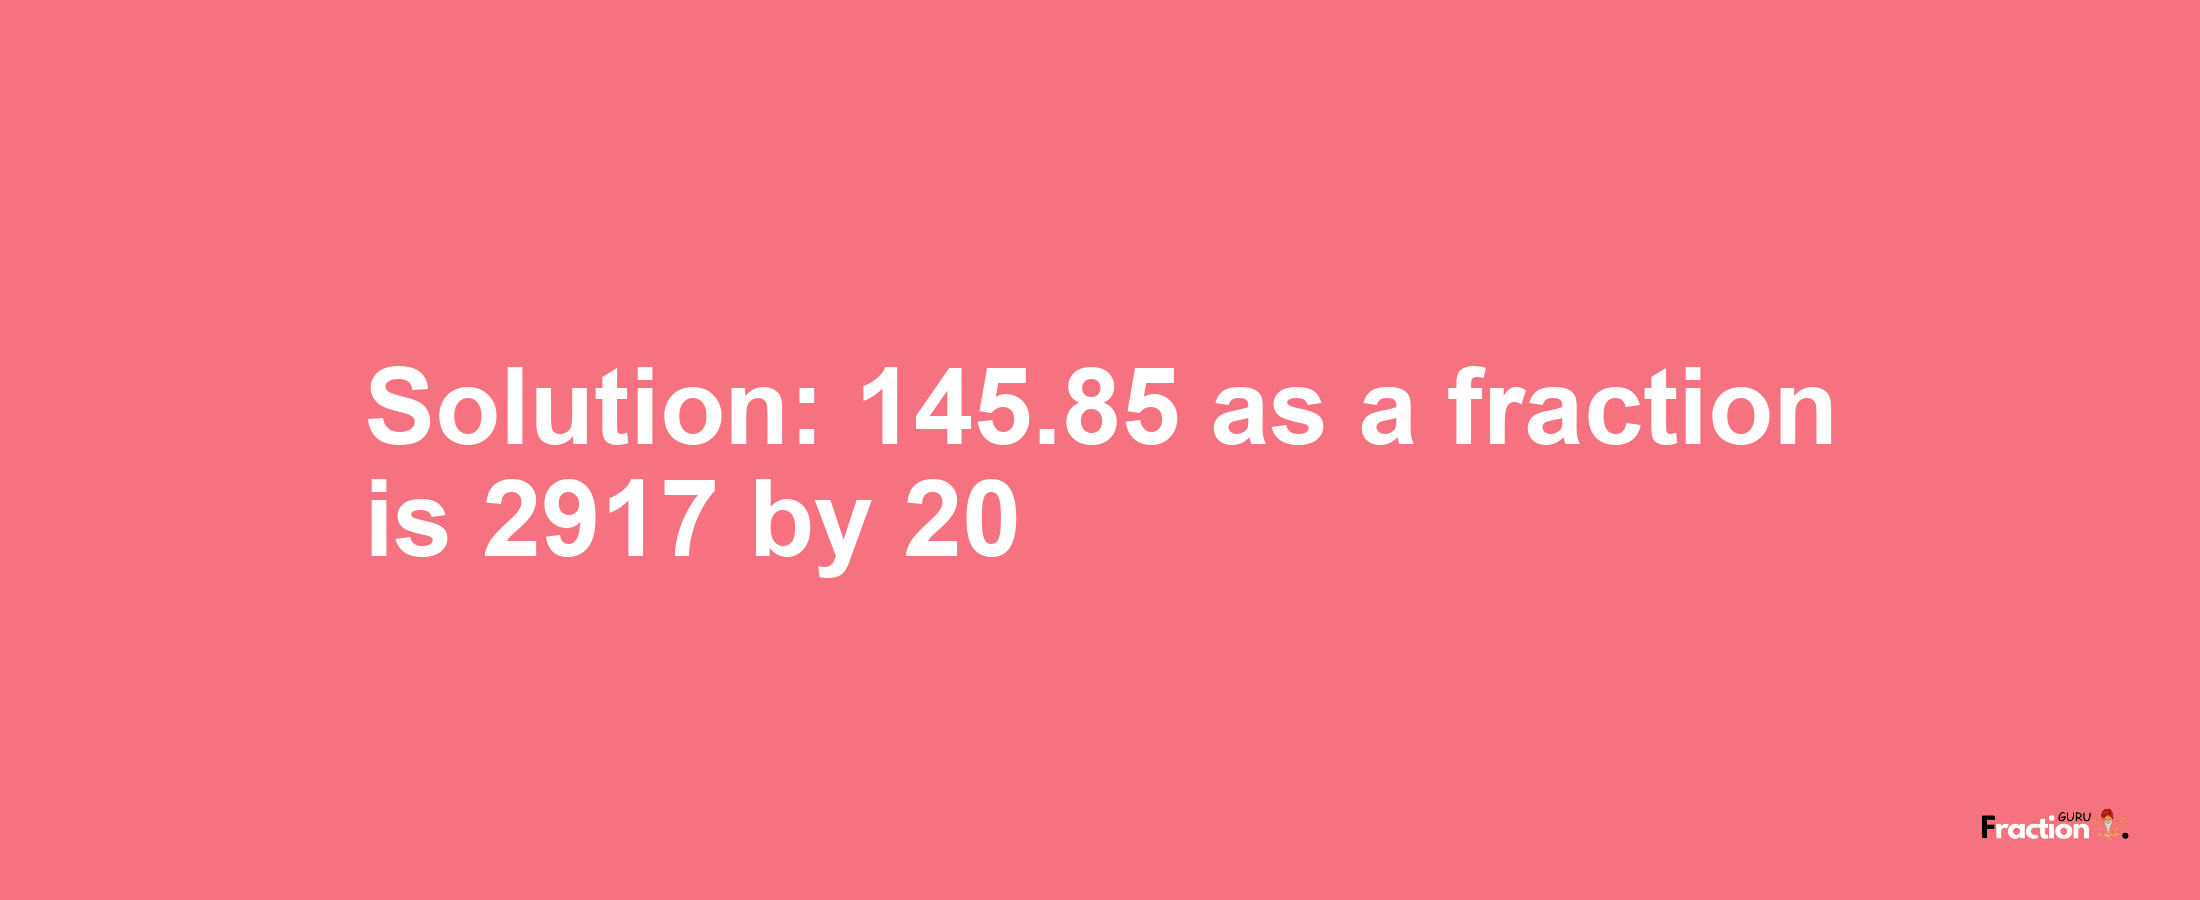 Solution:145.85 as a fraction is 2917/20